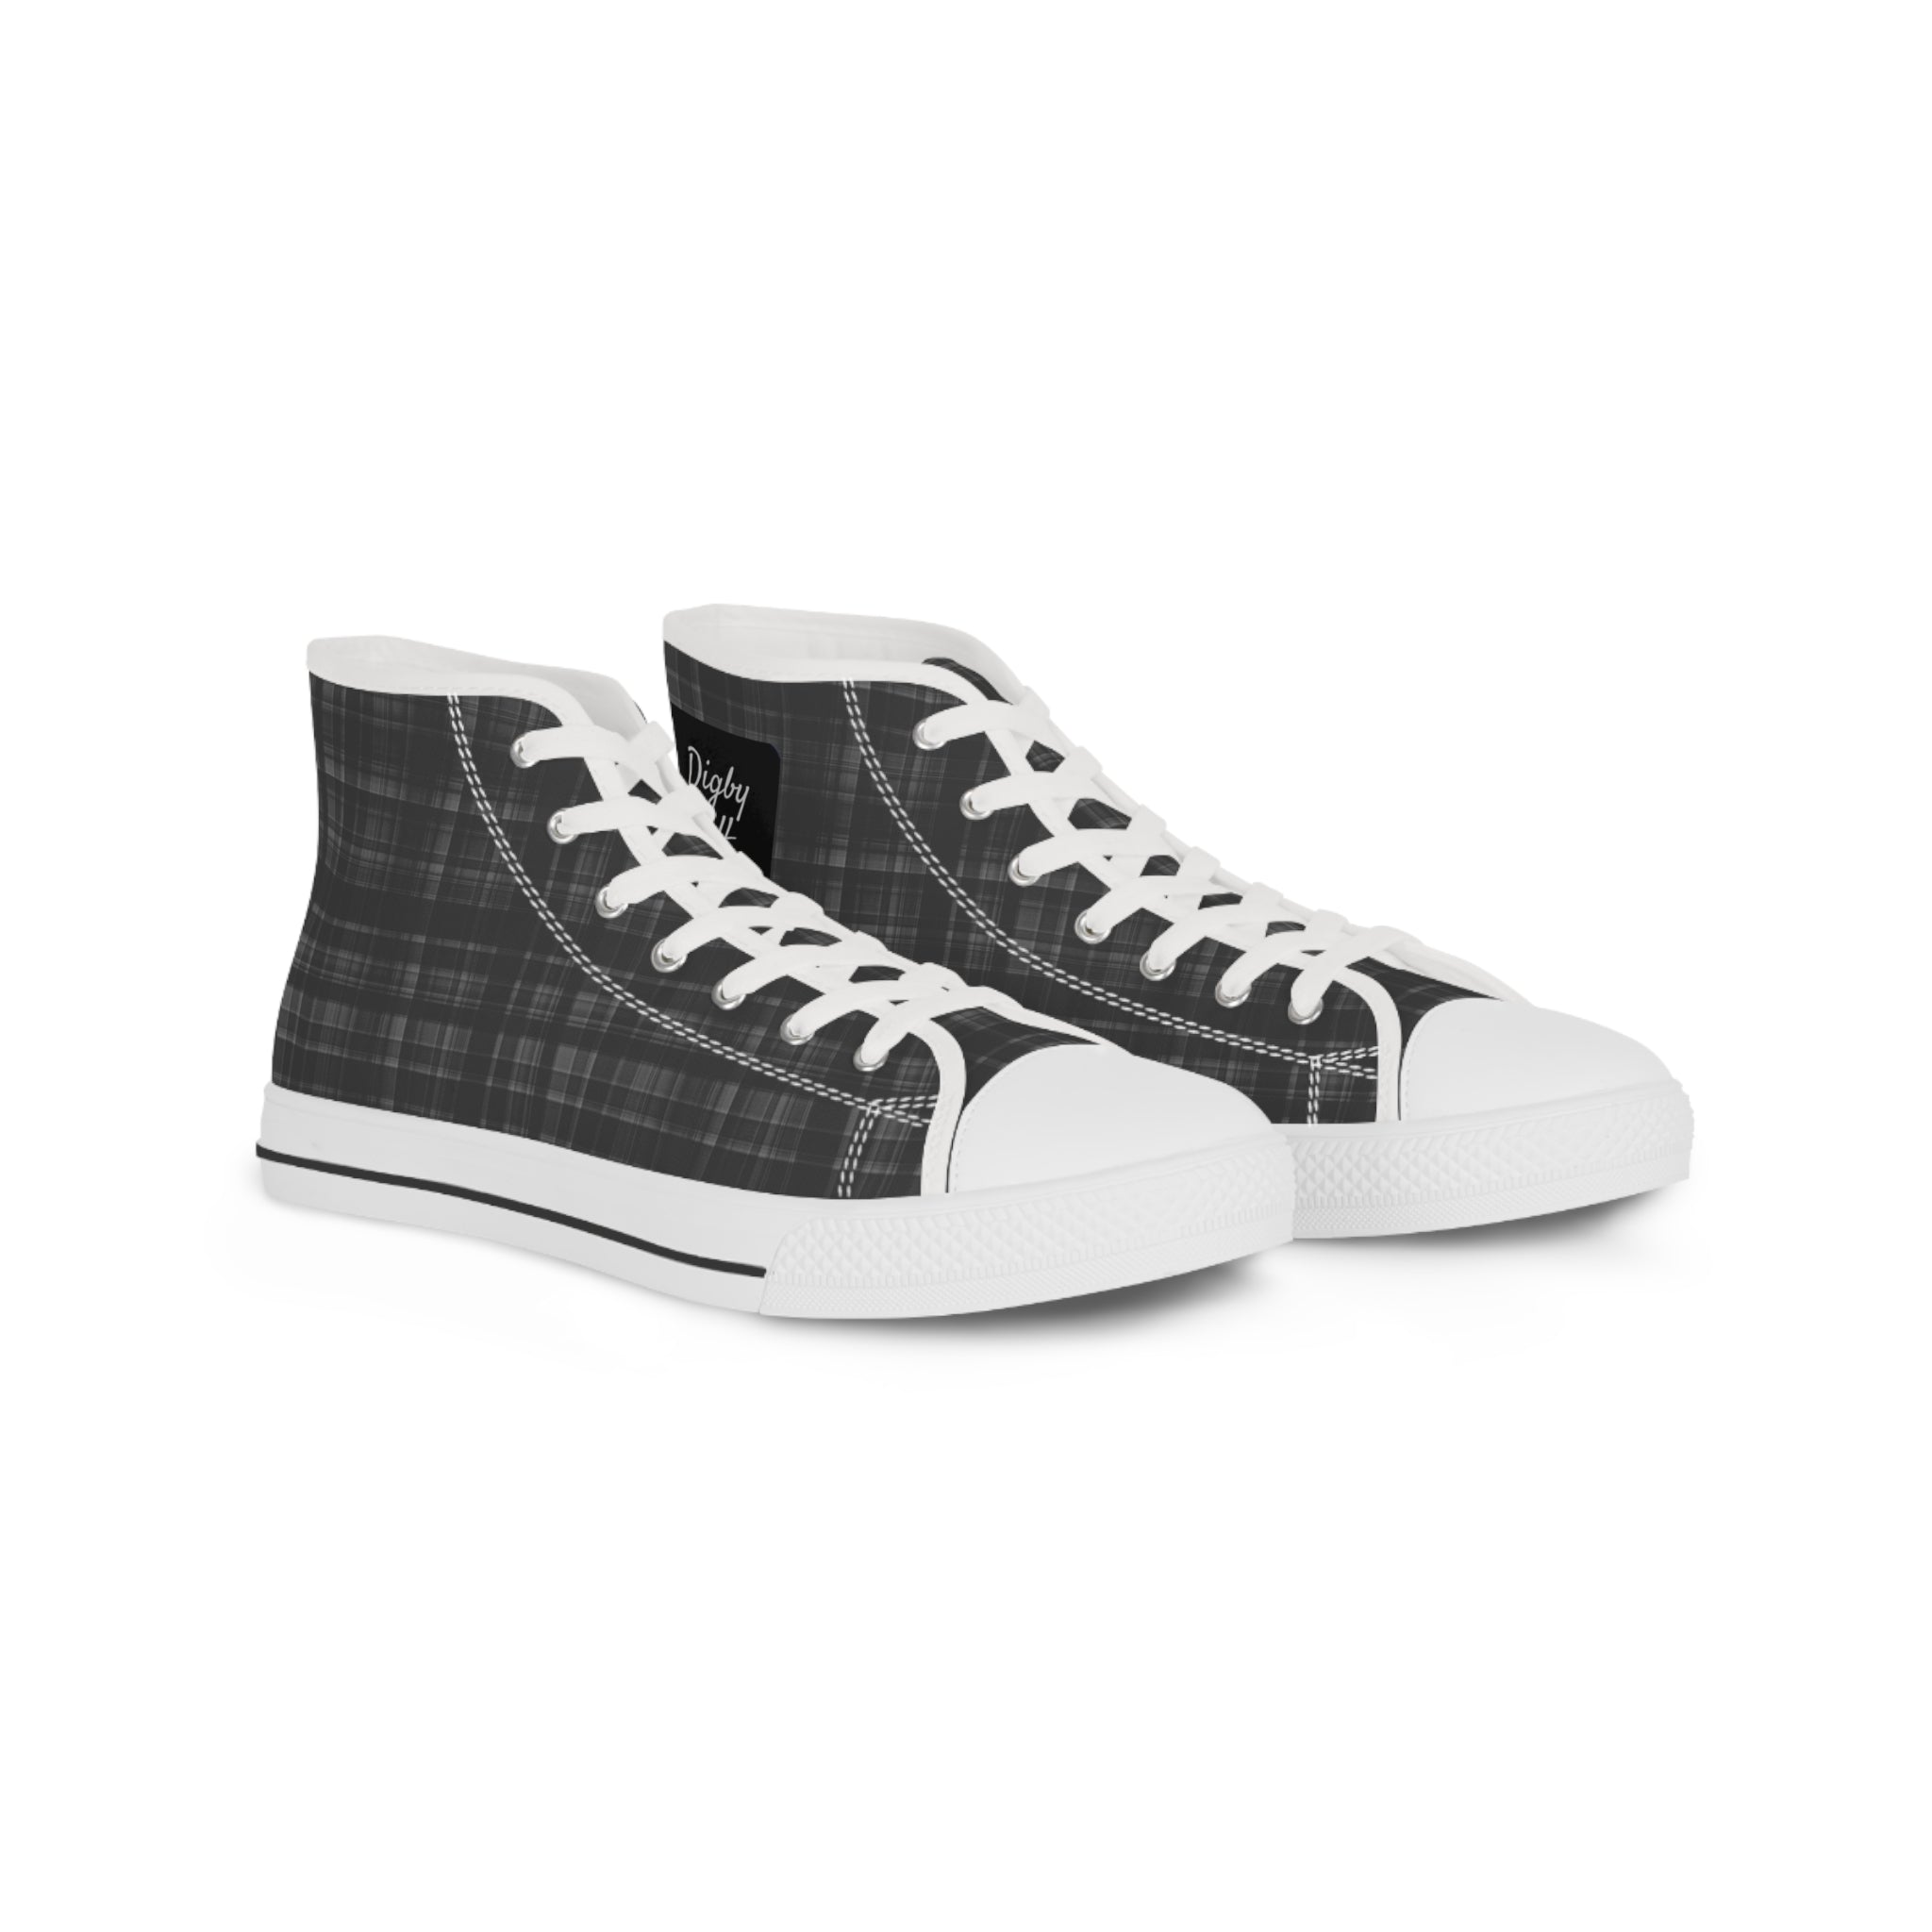 Two Digby Golf sneakers side by side featuring black and grey plaid pattern with white accents